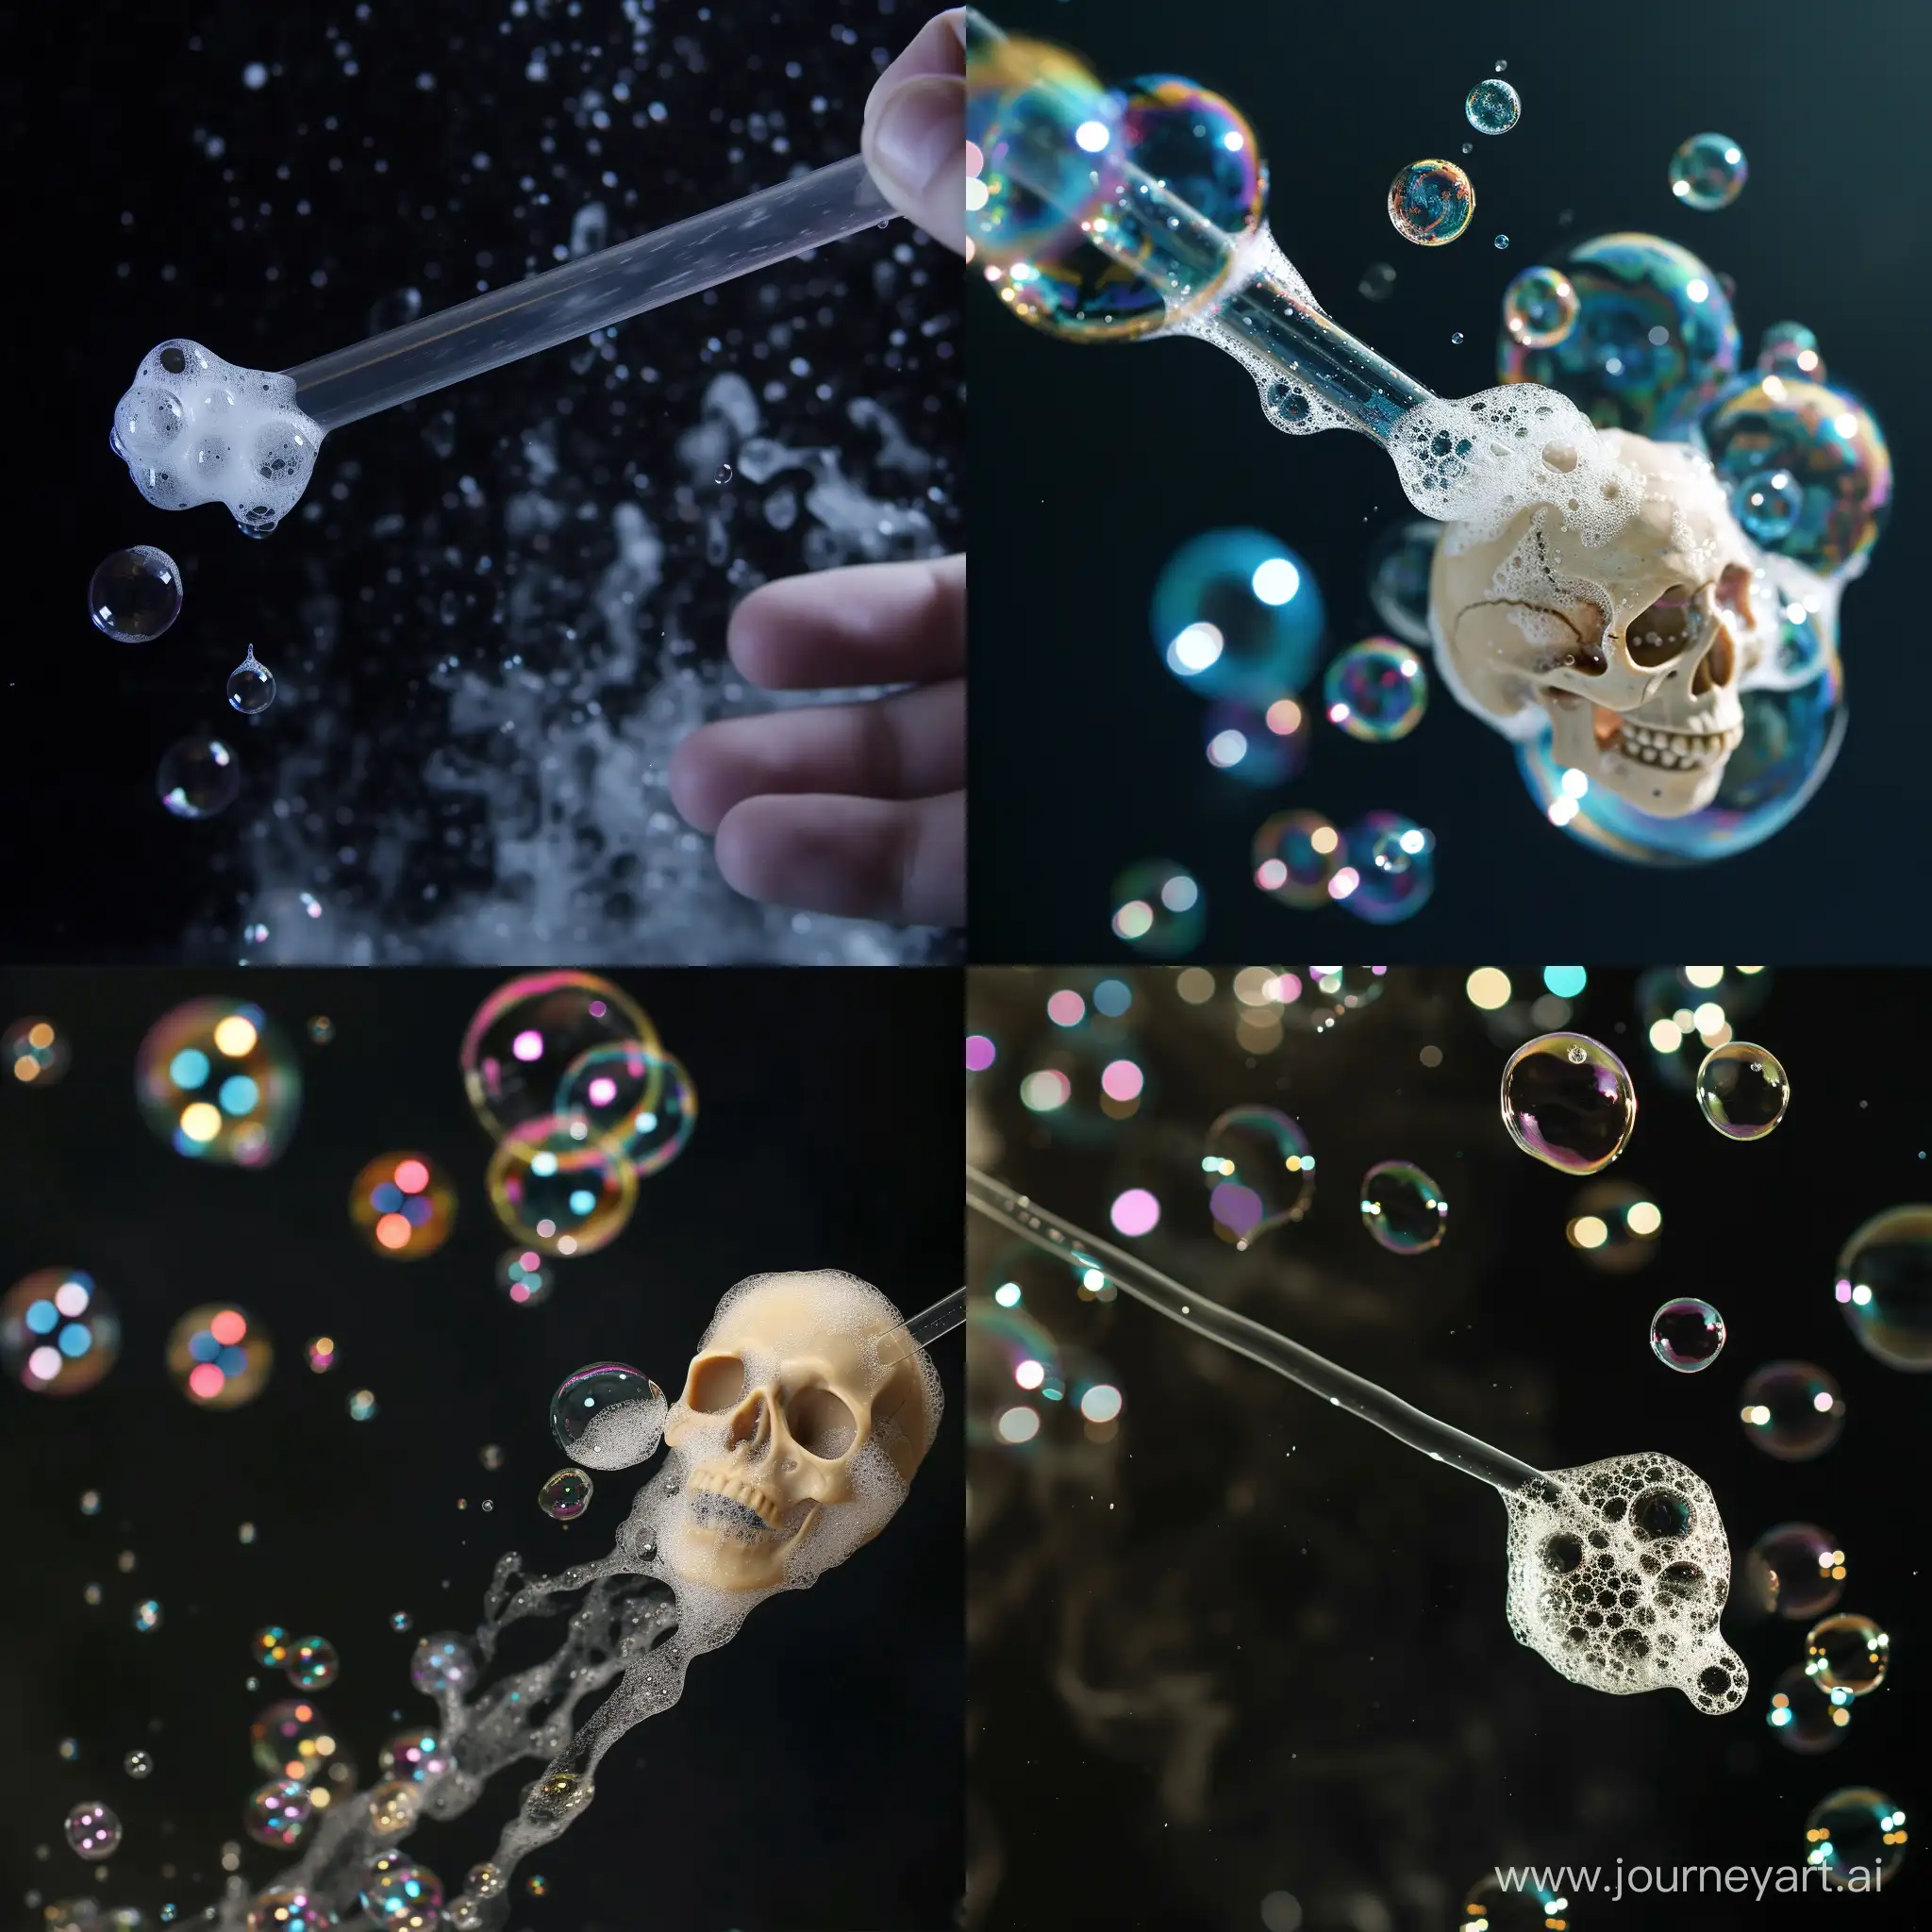 Ethereal-Moment-Death-Releases-Soap-Bubbles